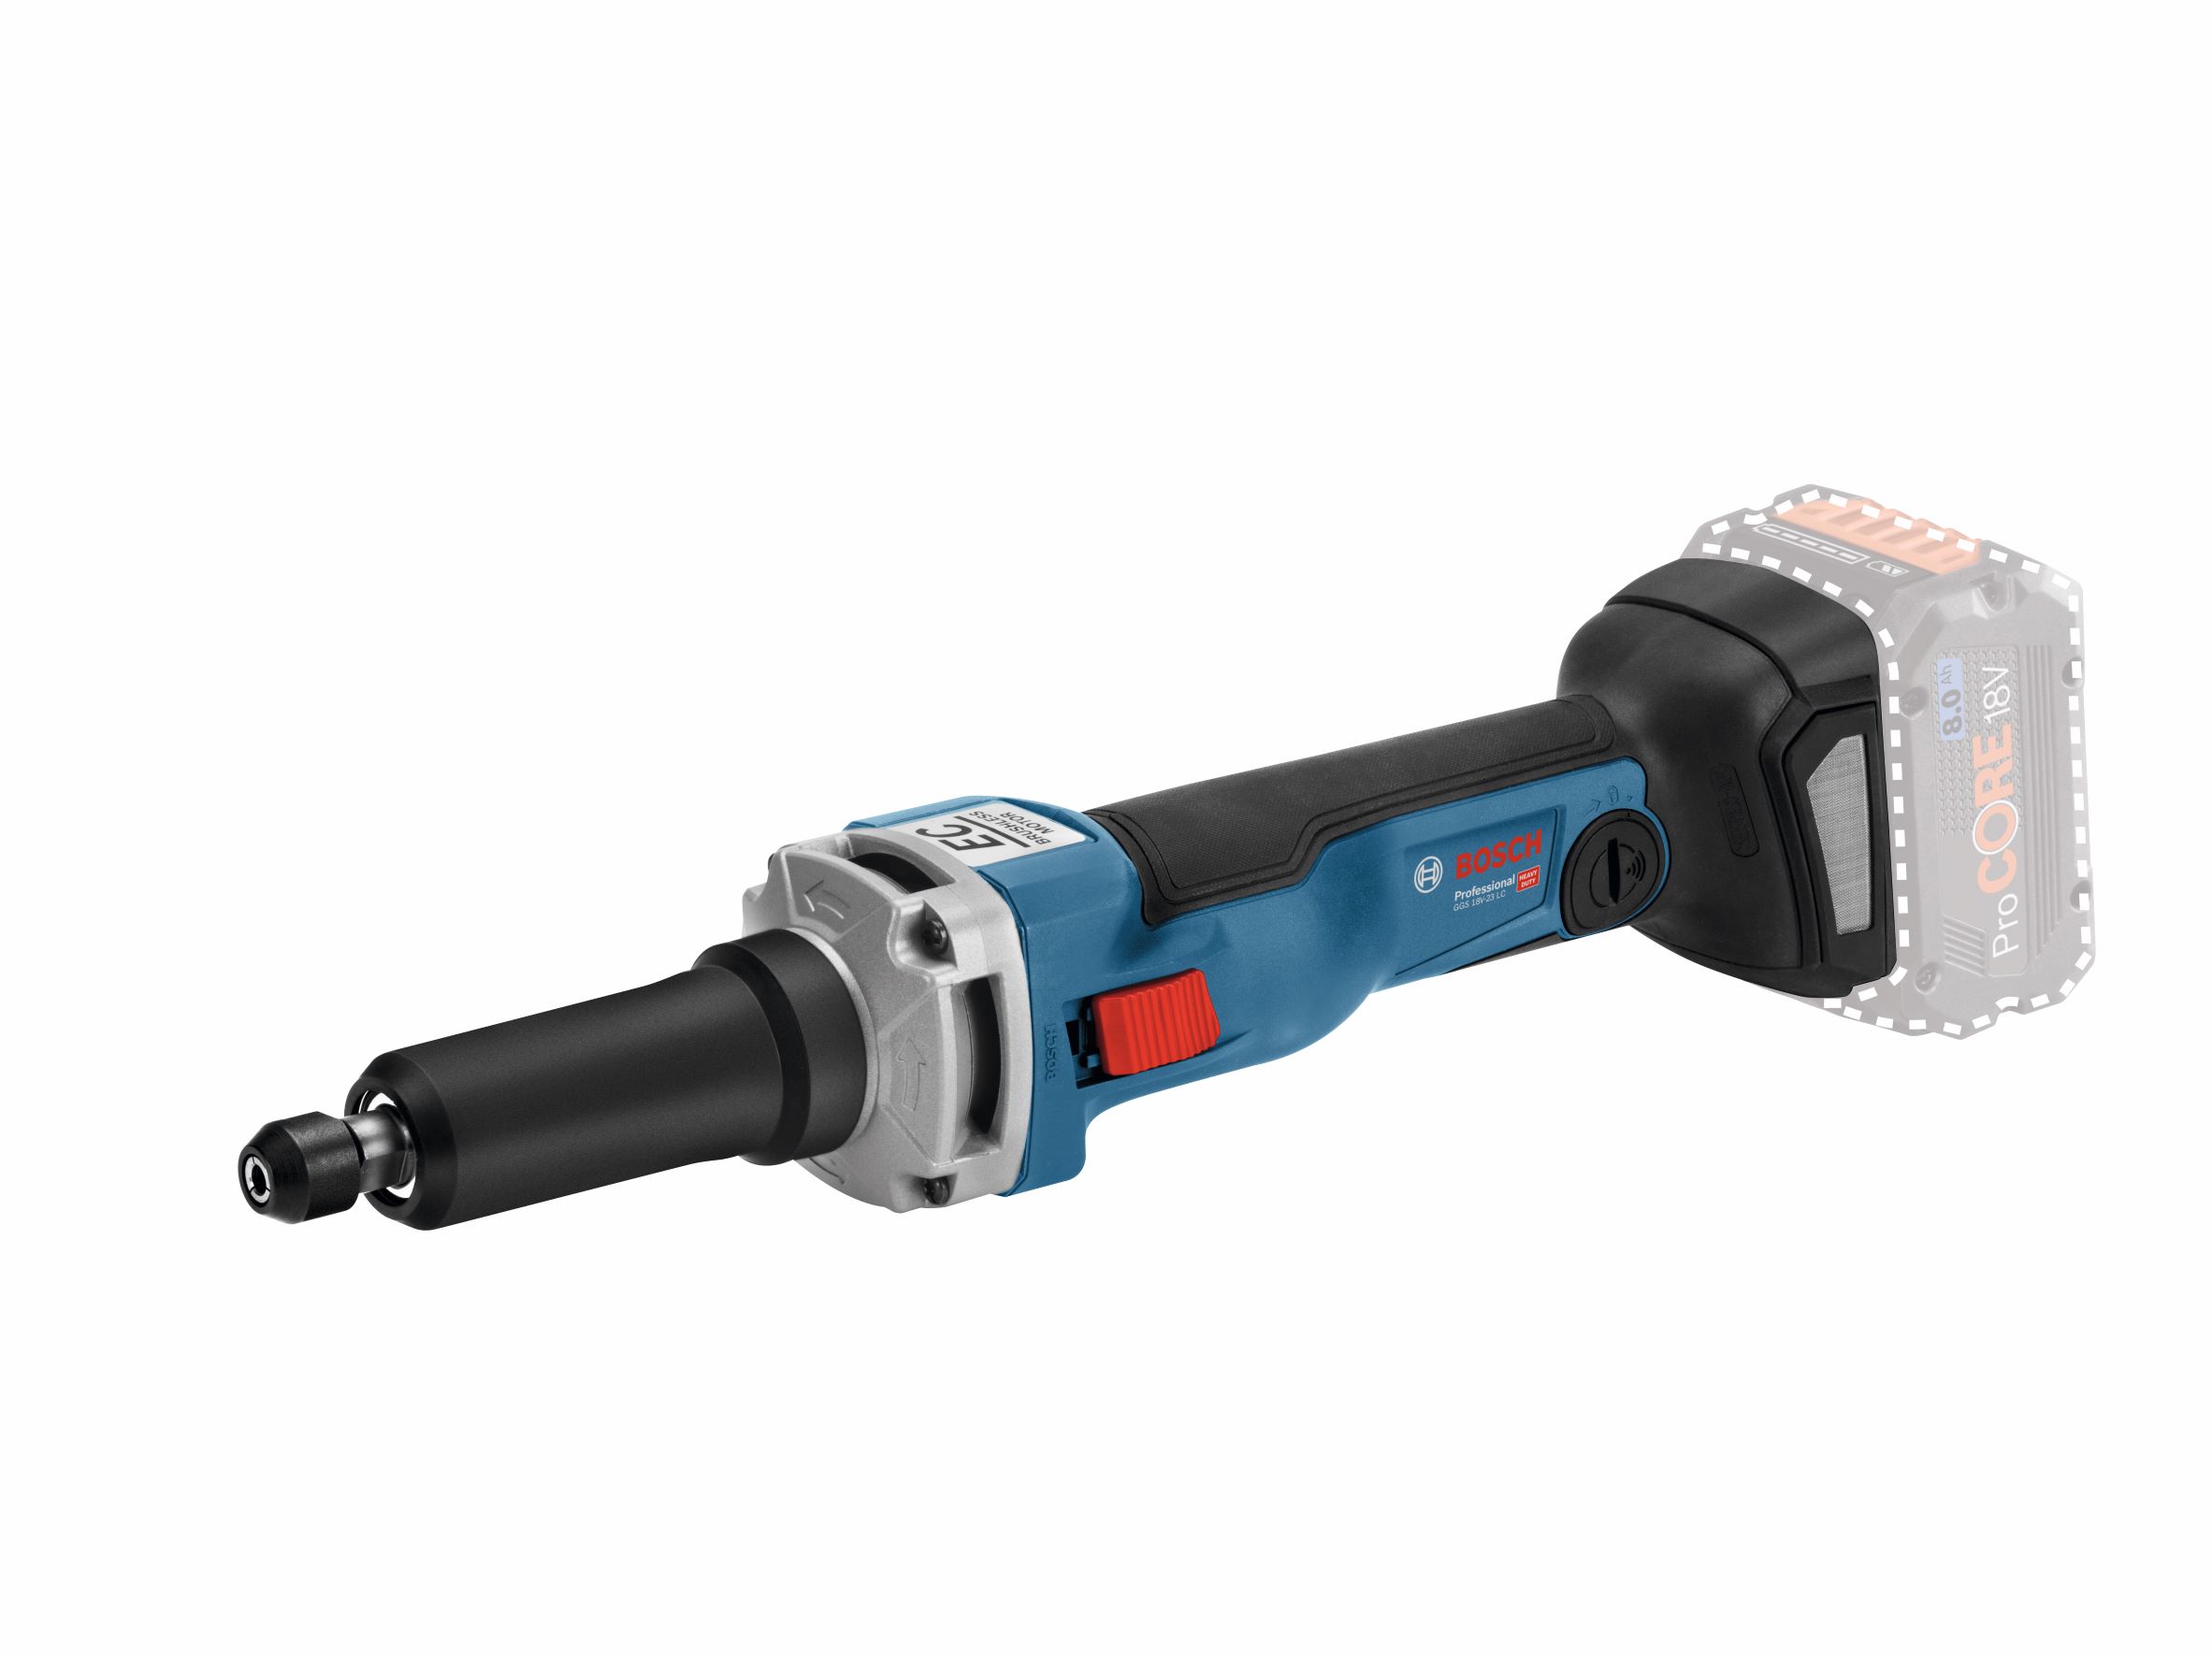 GGS 18V-23 LC Cordless Straight Grinder in L-Boxx Bosch - 1